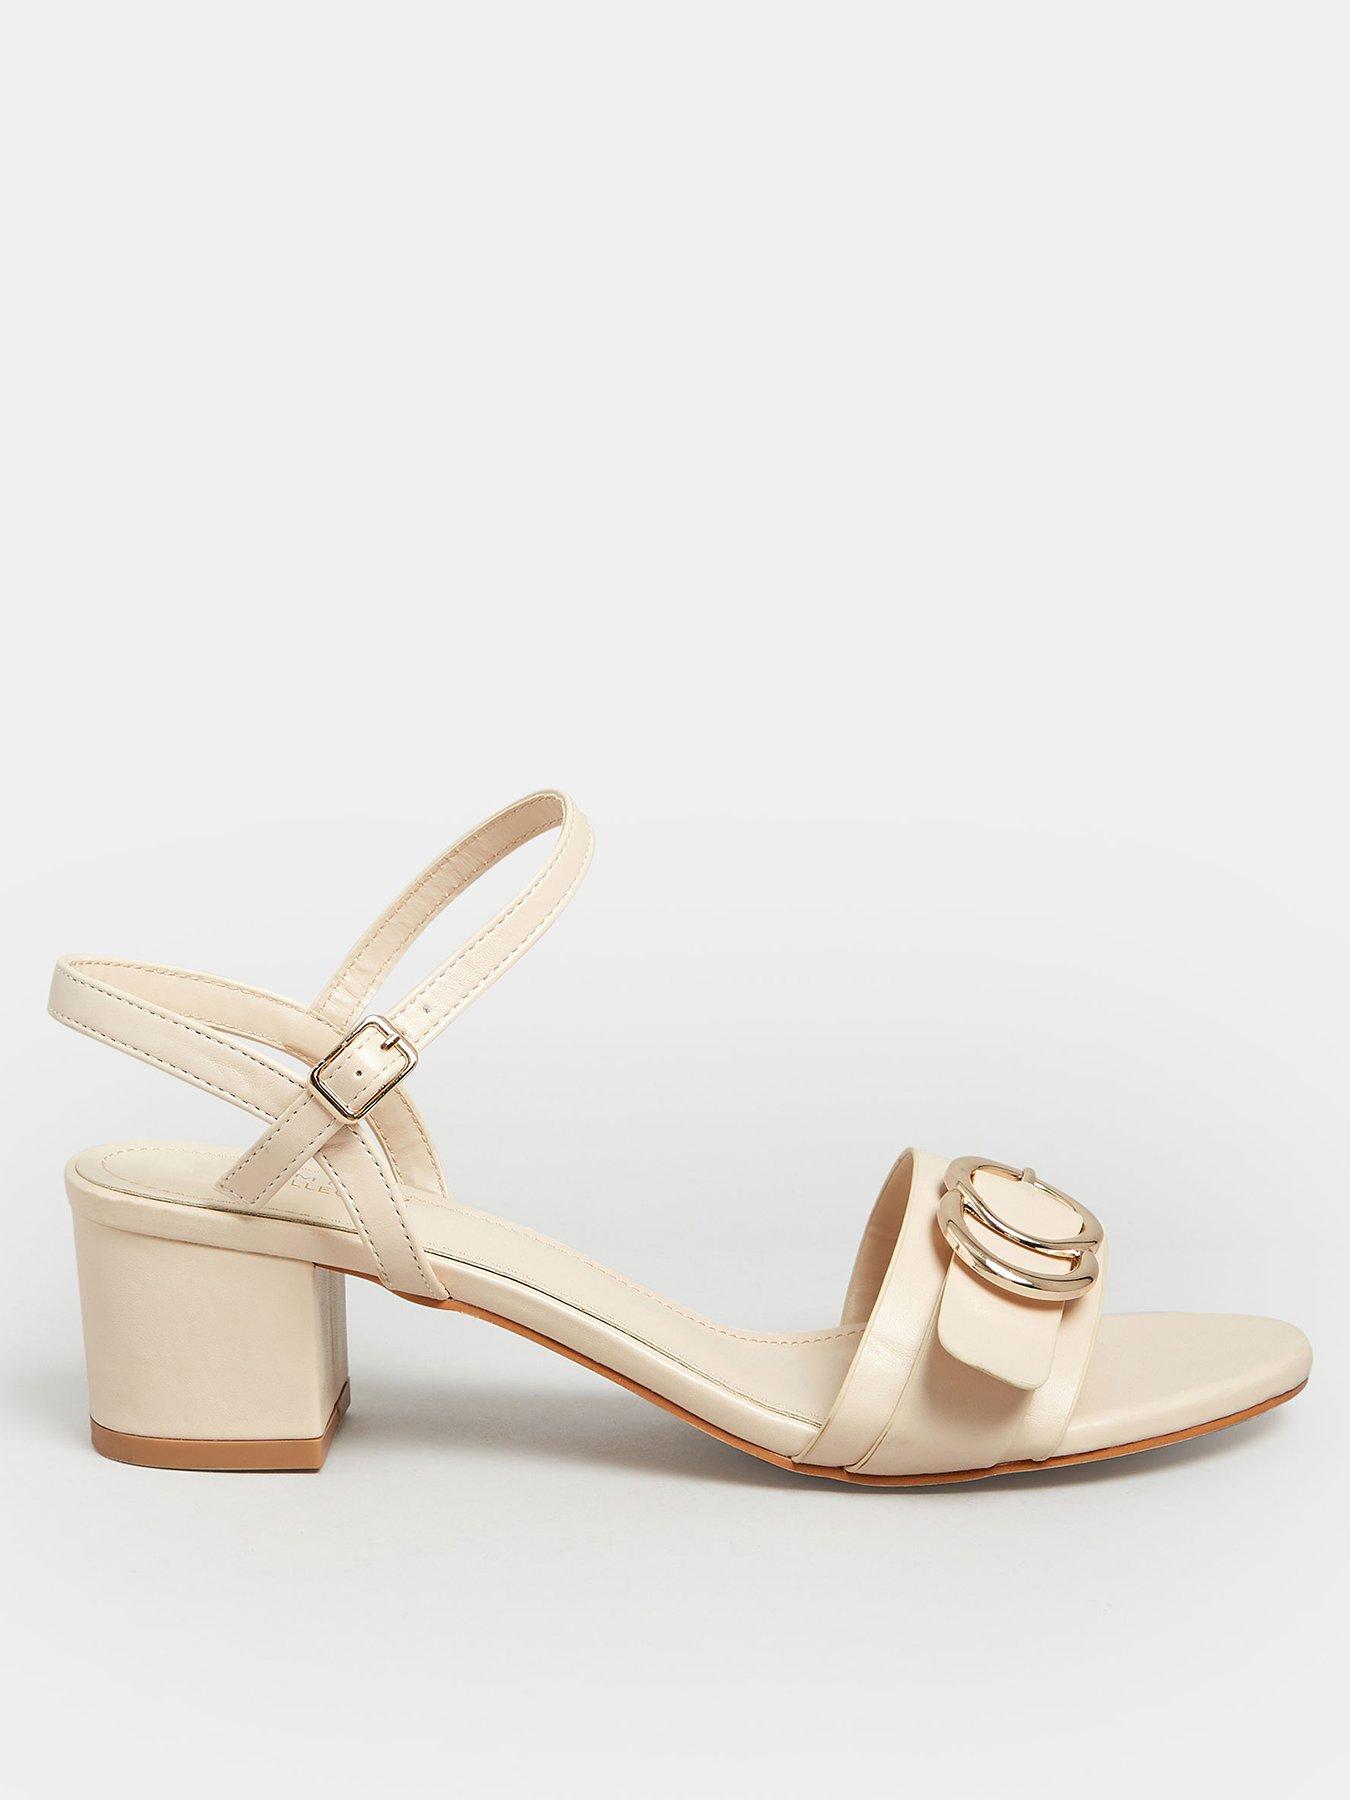 https://media.very.ie/i/littlewoodsireland/VG7MN_SQ1_0000000003_NATURAL_SLs/yours-extra-wide-fit-buckle-detail-sandal-natural.jpg?$180x240_retinamobilex2$&$roundel_lwireland$&p1_img=curve